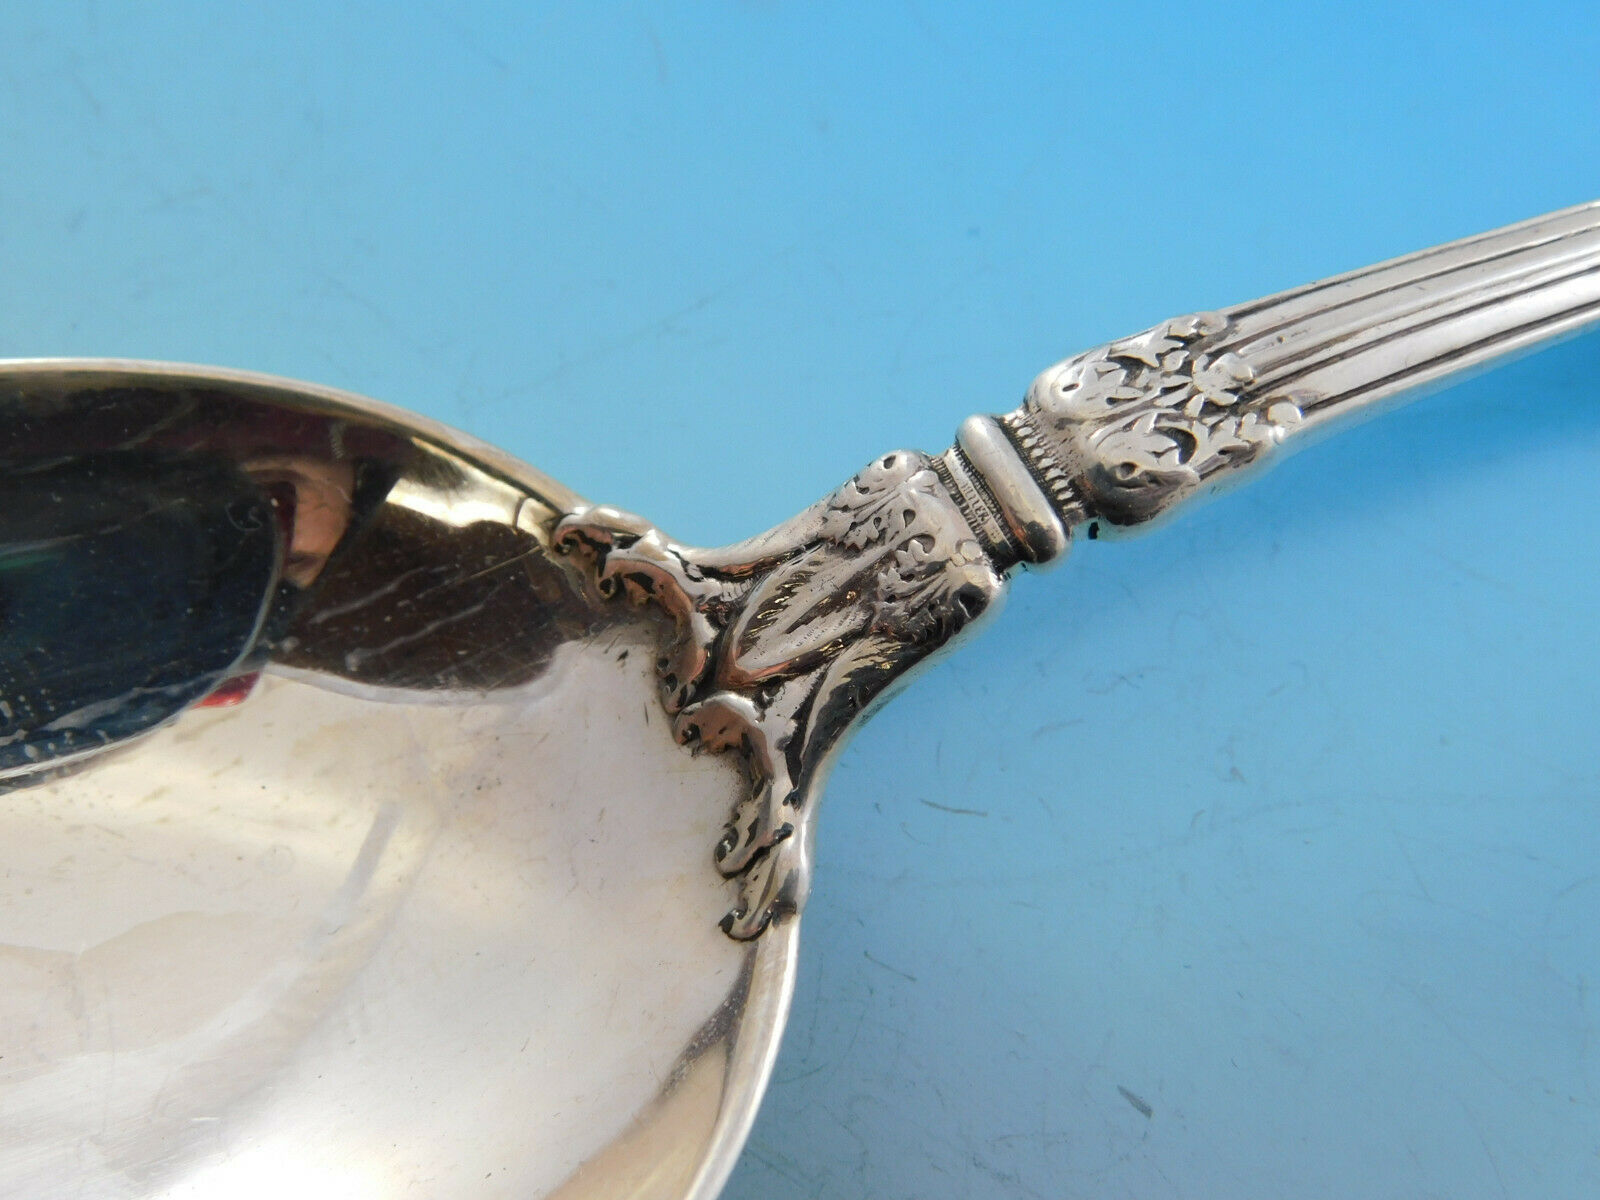 Whiting Sterling Vegetable Serving Spoon Louis XV